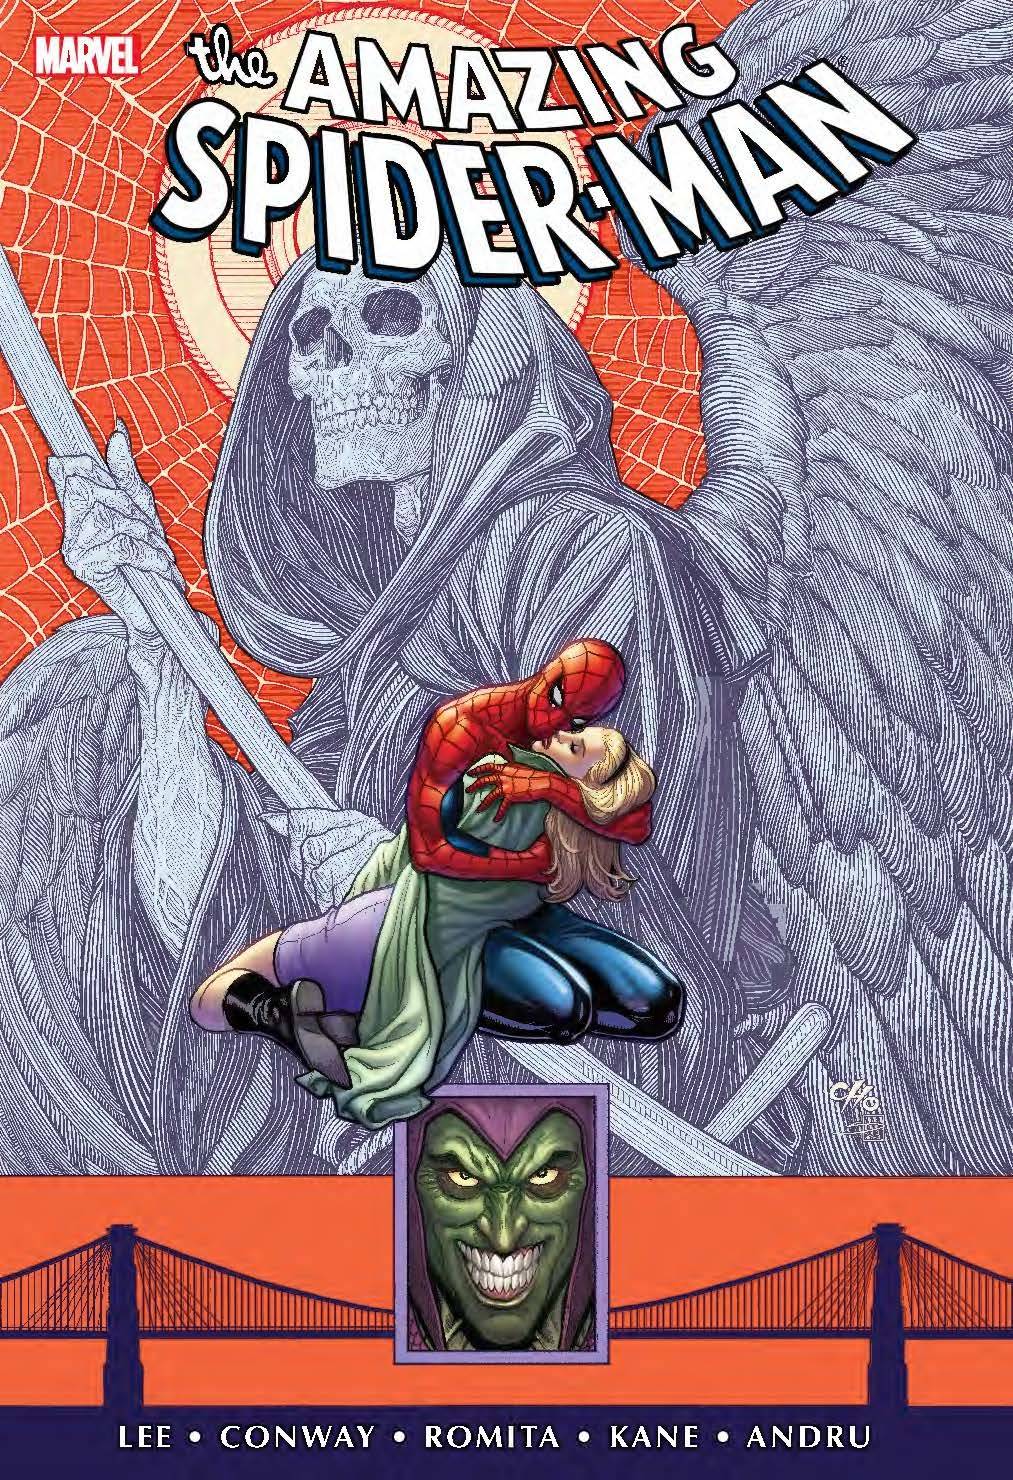 THE AMAZING SPIDER-MAN OMNIBUS VOL. 4 HC CHO COVER (Trade Paperback)